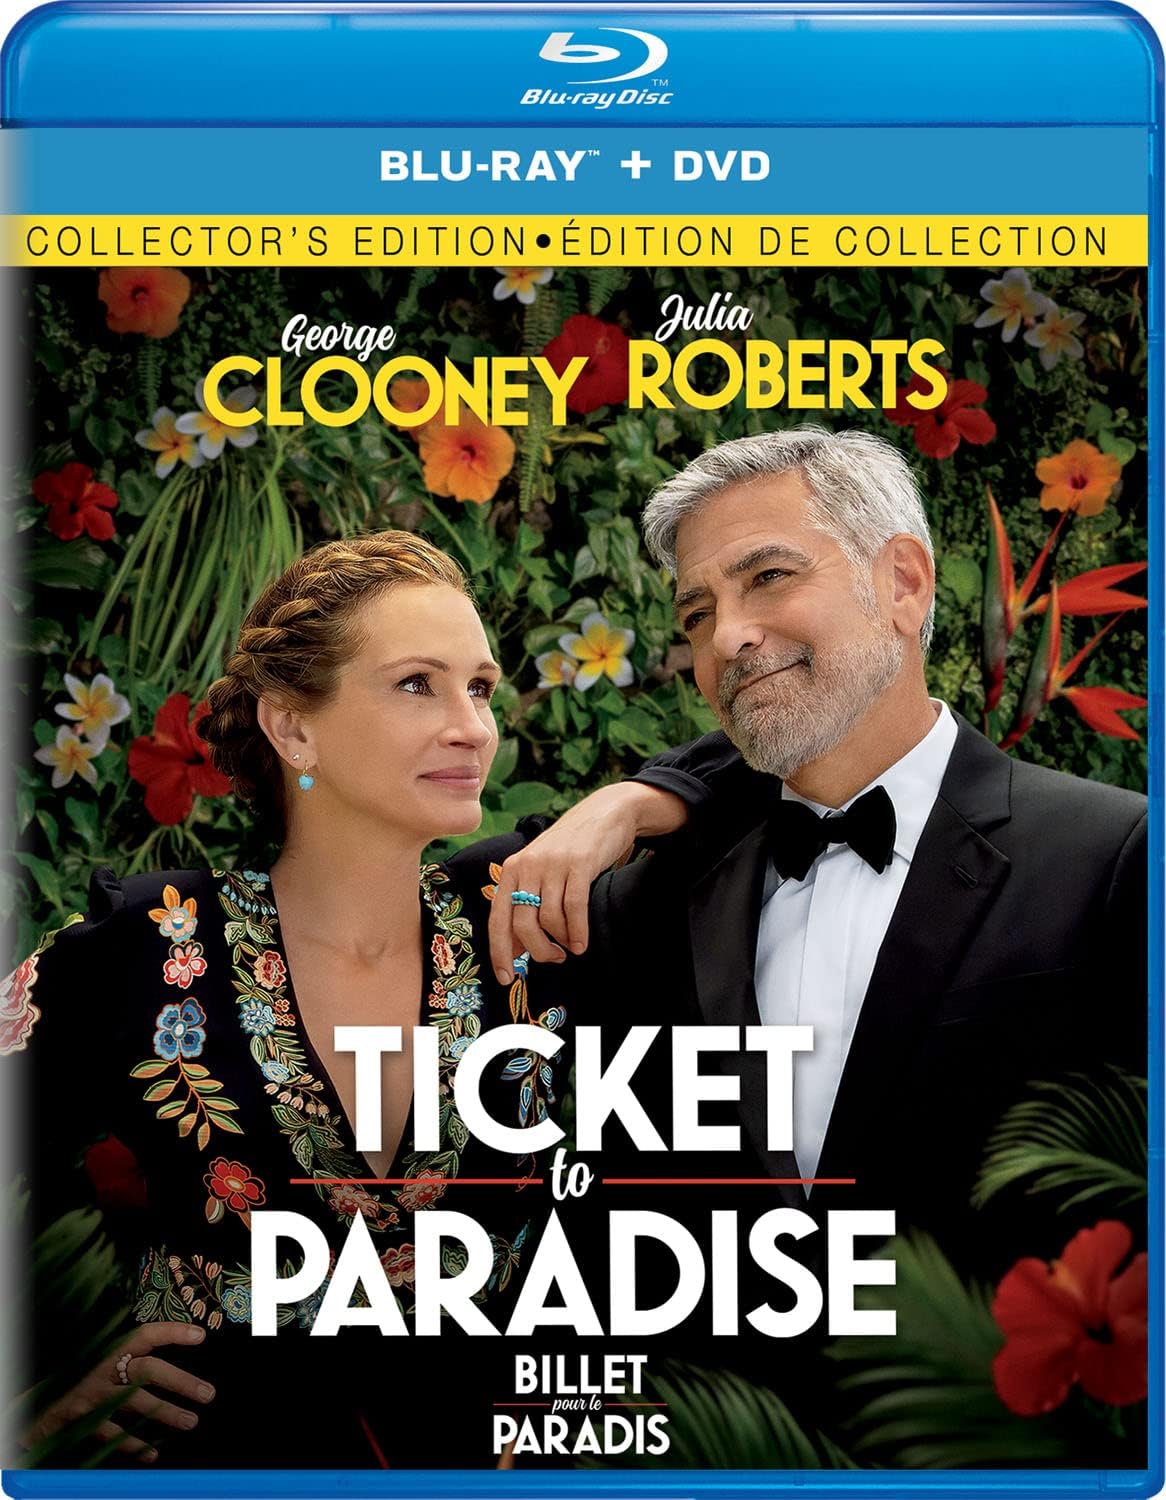 Ticket to Paradise: Collector's Edition [Blu-ray + DVD]